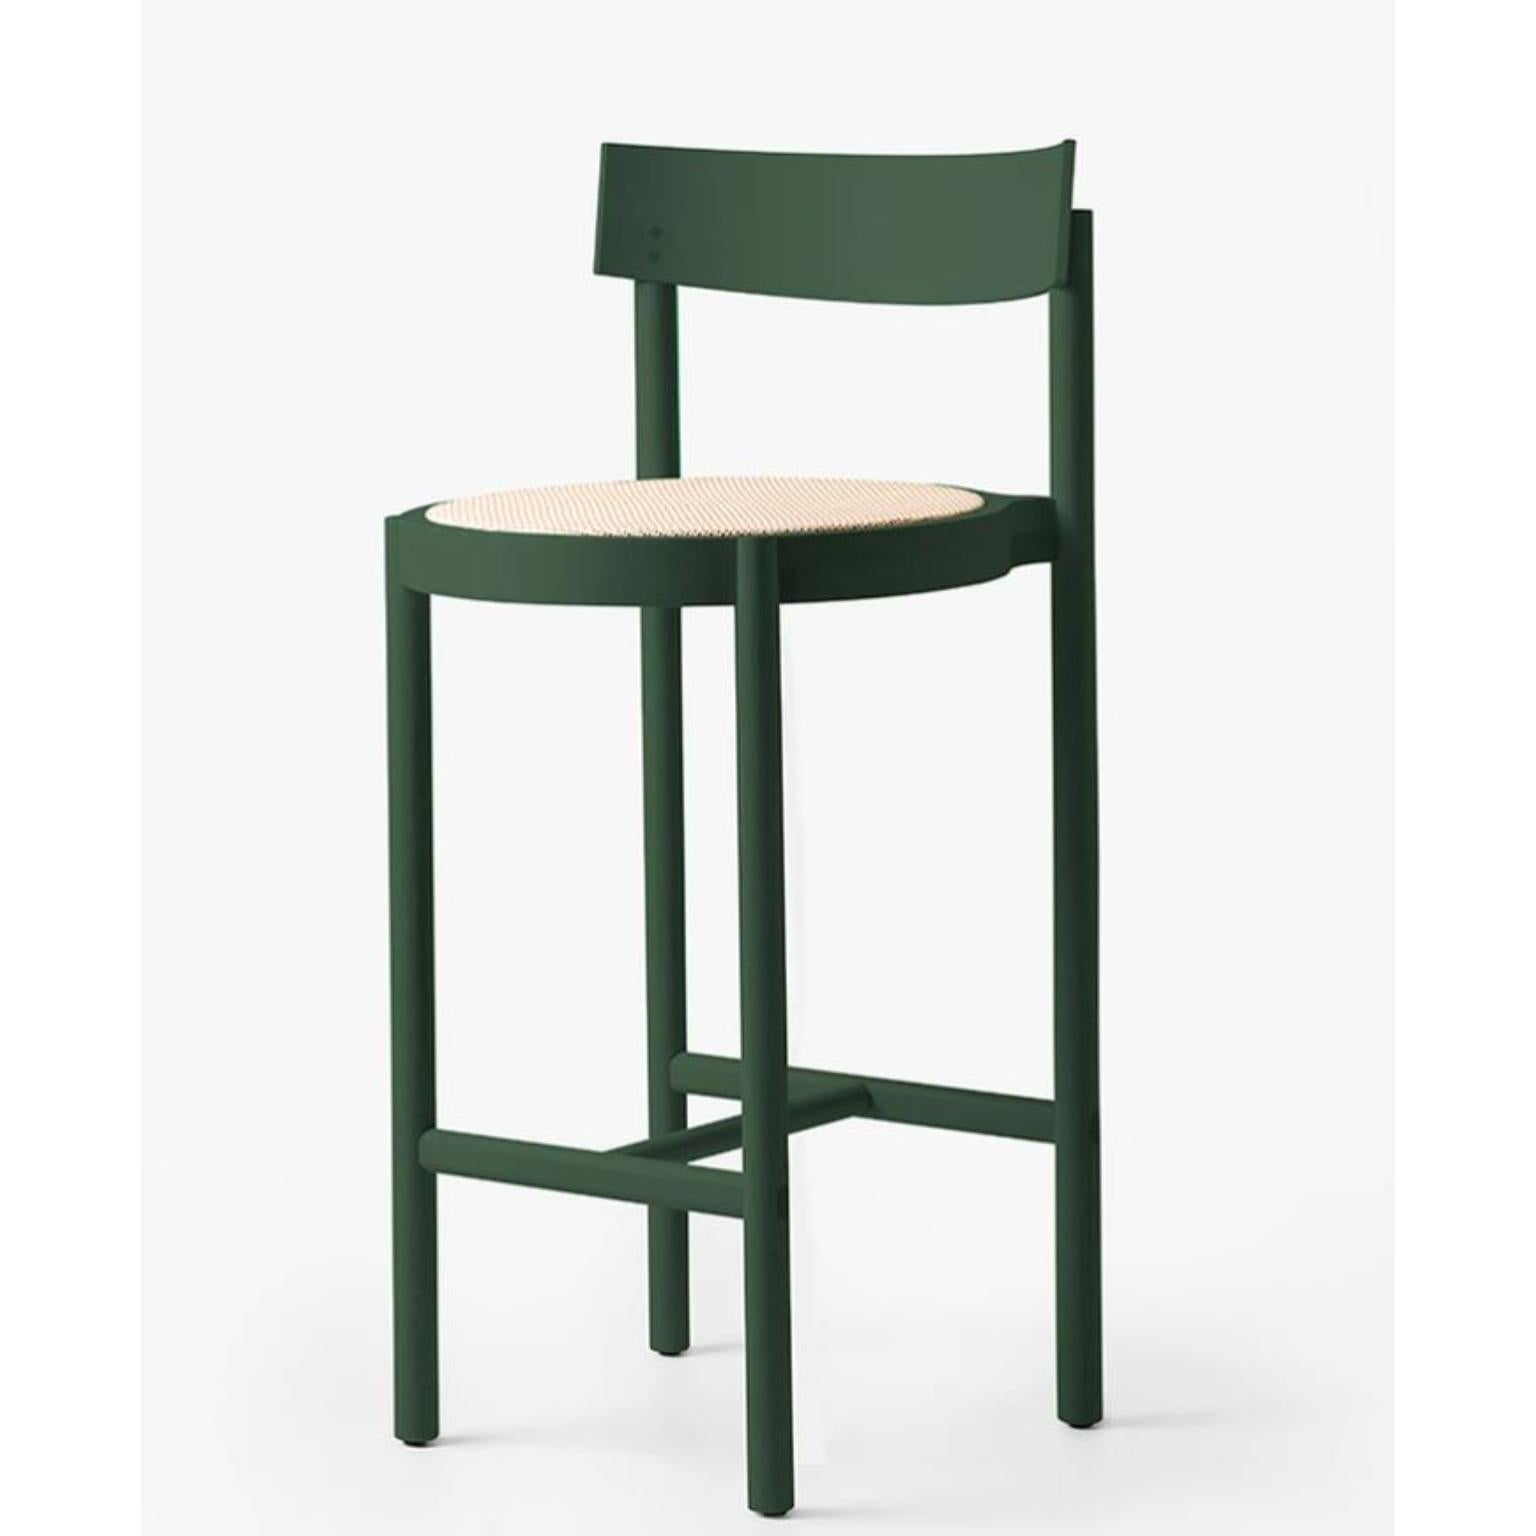 Green Gravatá Counter Stool by Wentz
Dimensions: D 52 x W 47 x H 90 cm
Materials: Tauari Wood, Cane/Upholstery.
Weight: 4,4kg / 9,7 lbs

The Gravatá series synthesizes our vision regarding the functional and visual simplicity of furniture. Through